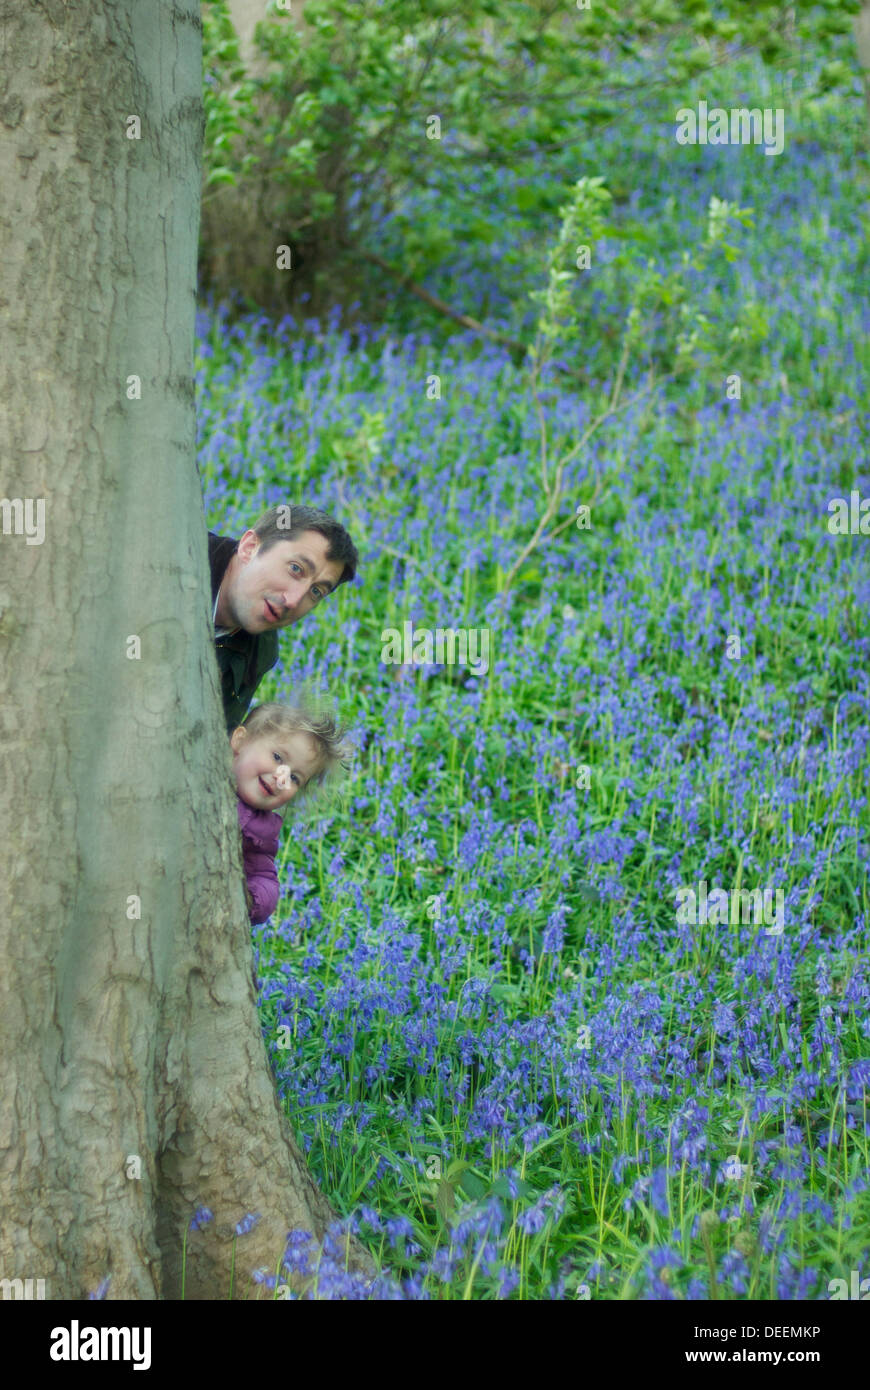 Child and adult playing hide and seek behind tree in a forest full of blue flowers Stock Photo